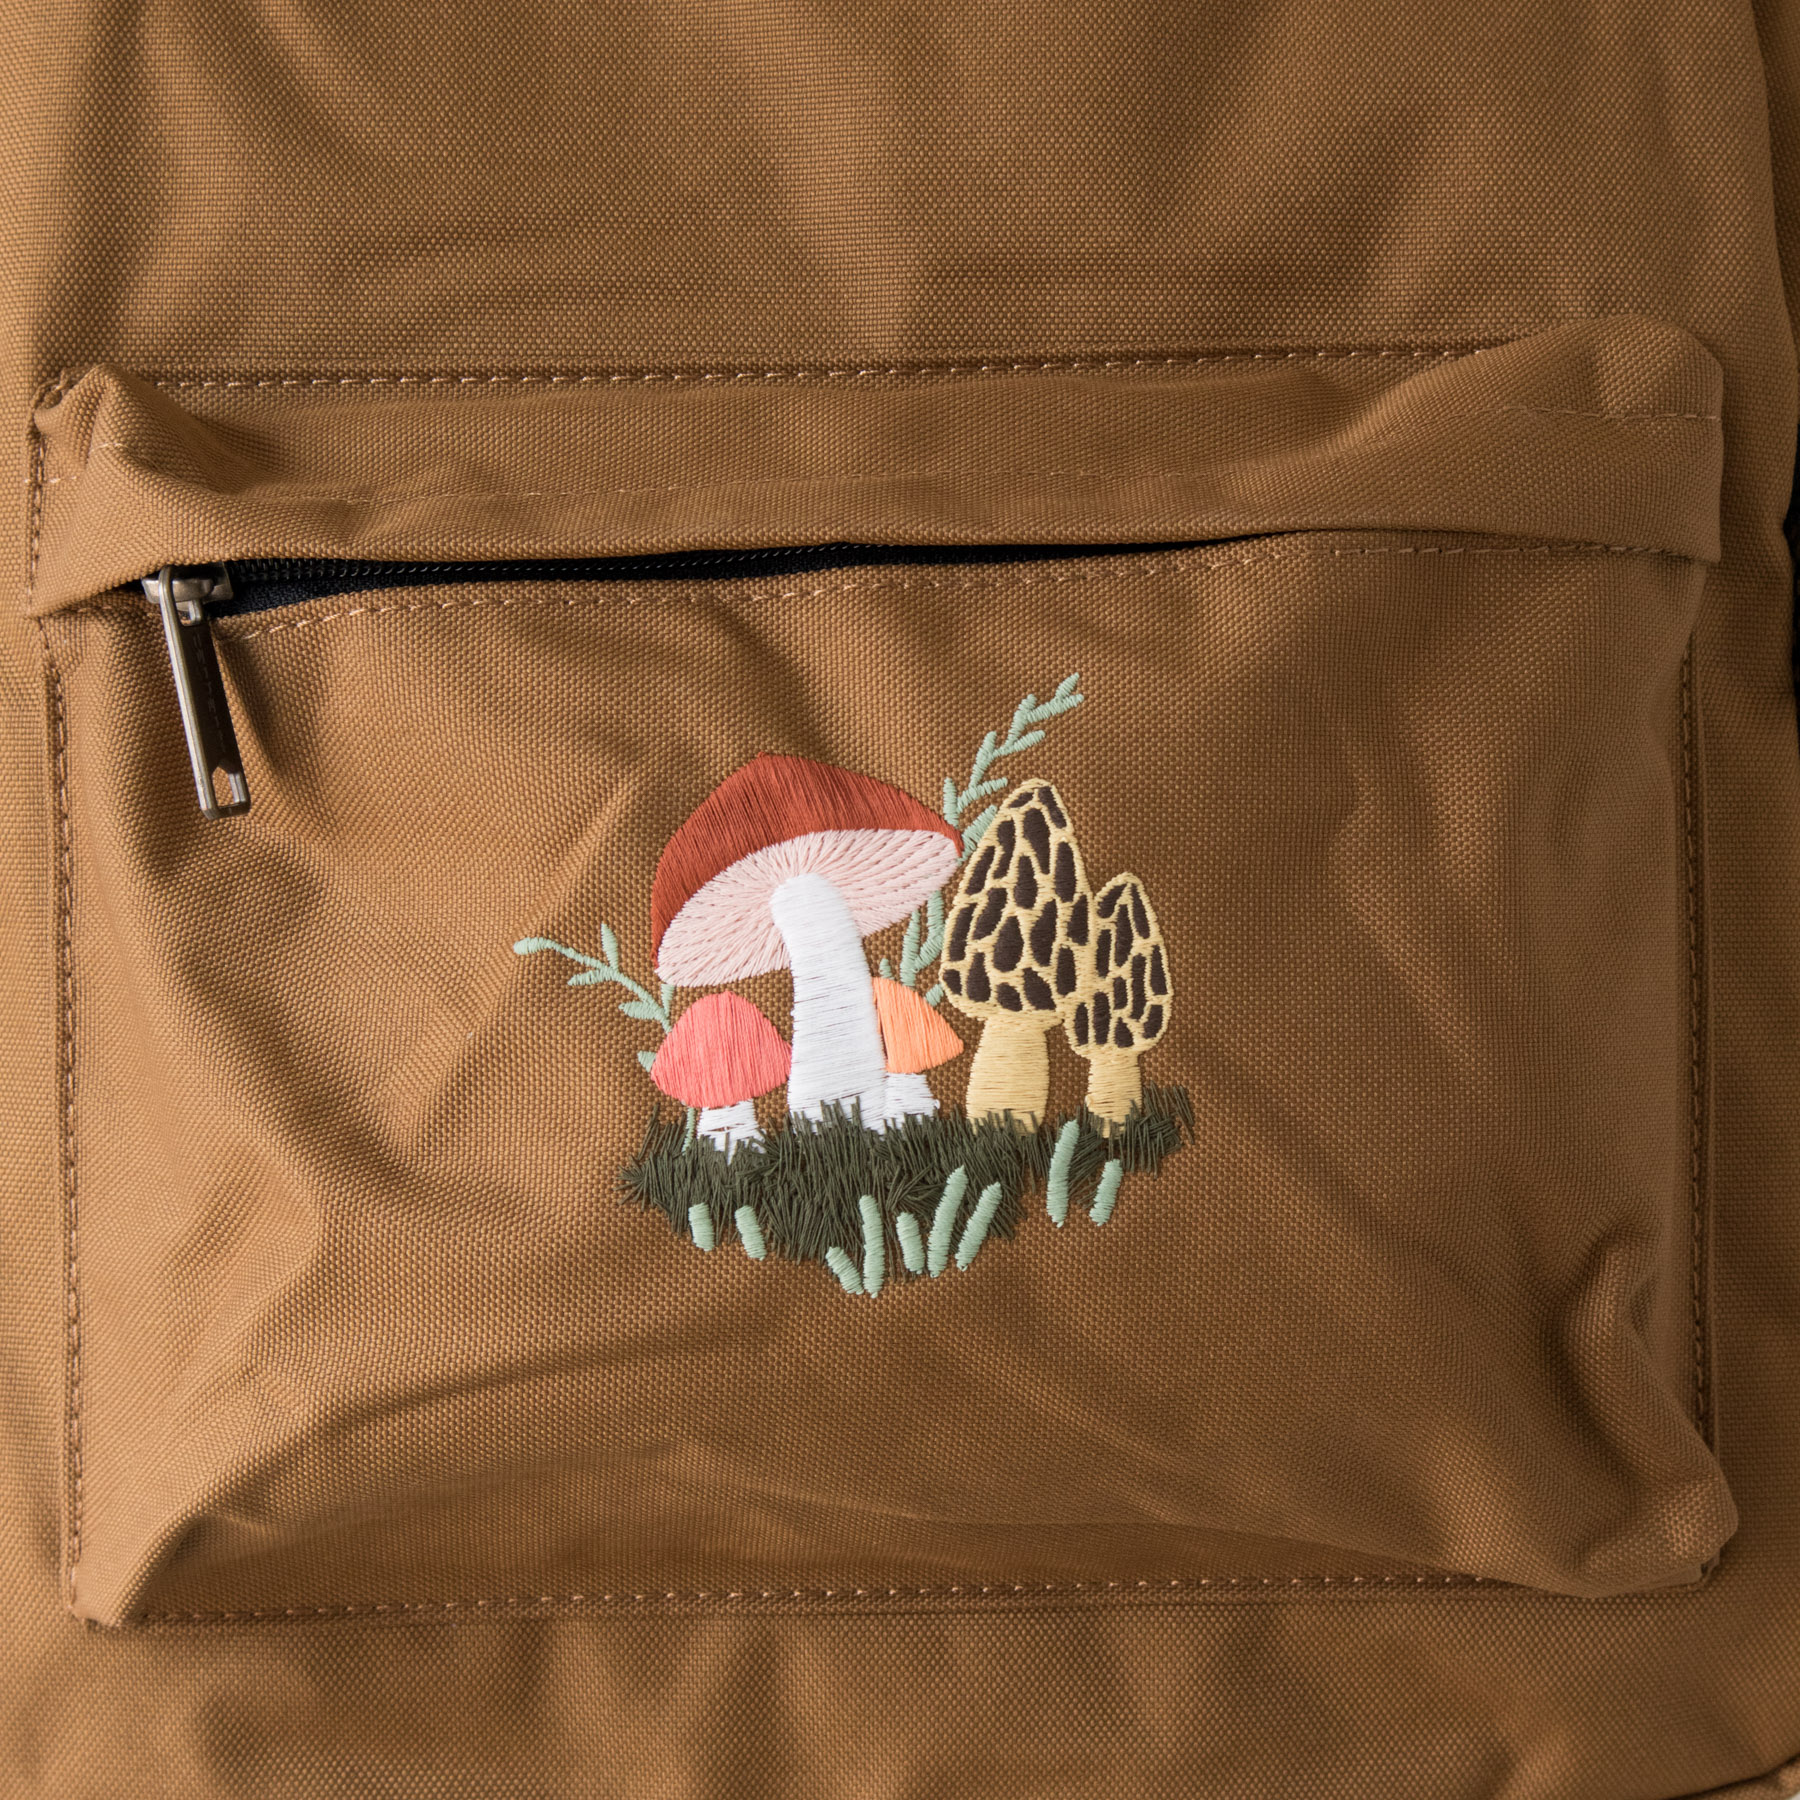 Product image - brown Carhartt backpack with embroidered mushroom design detail